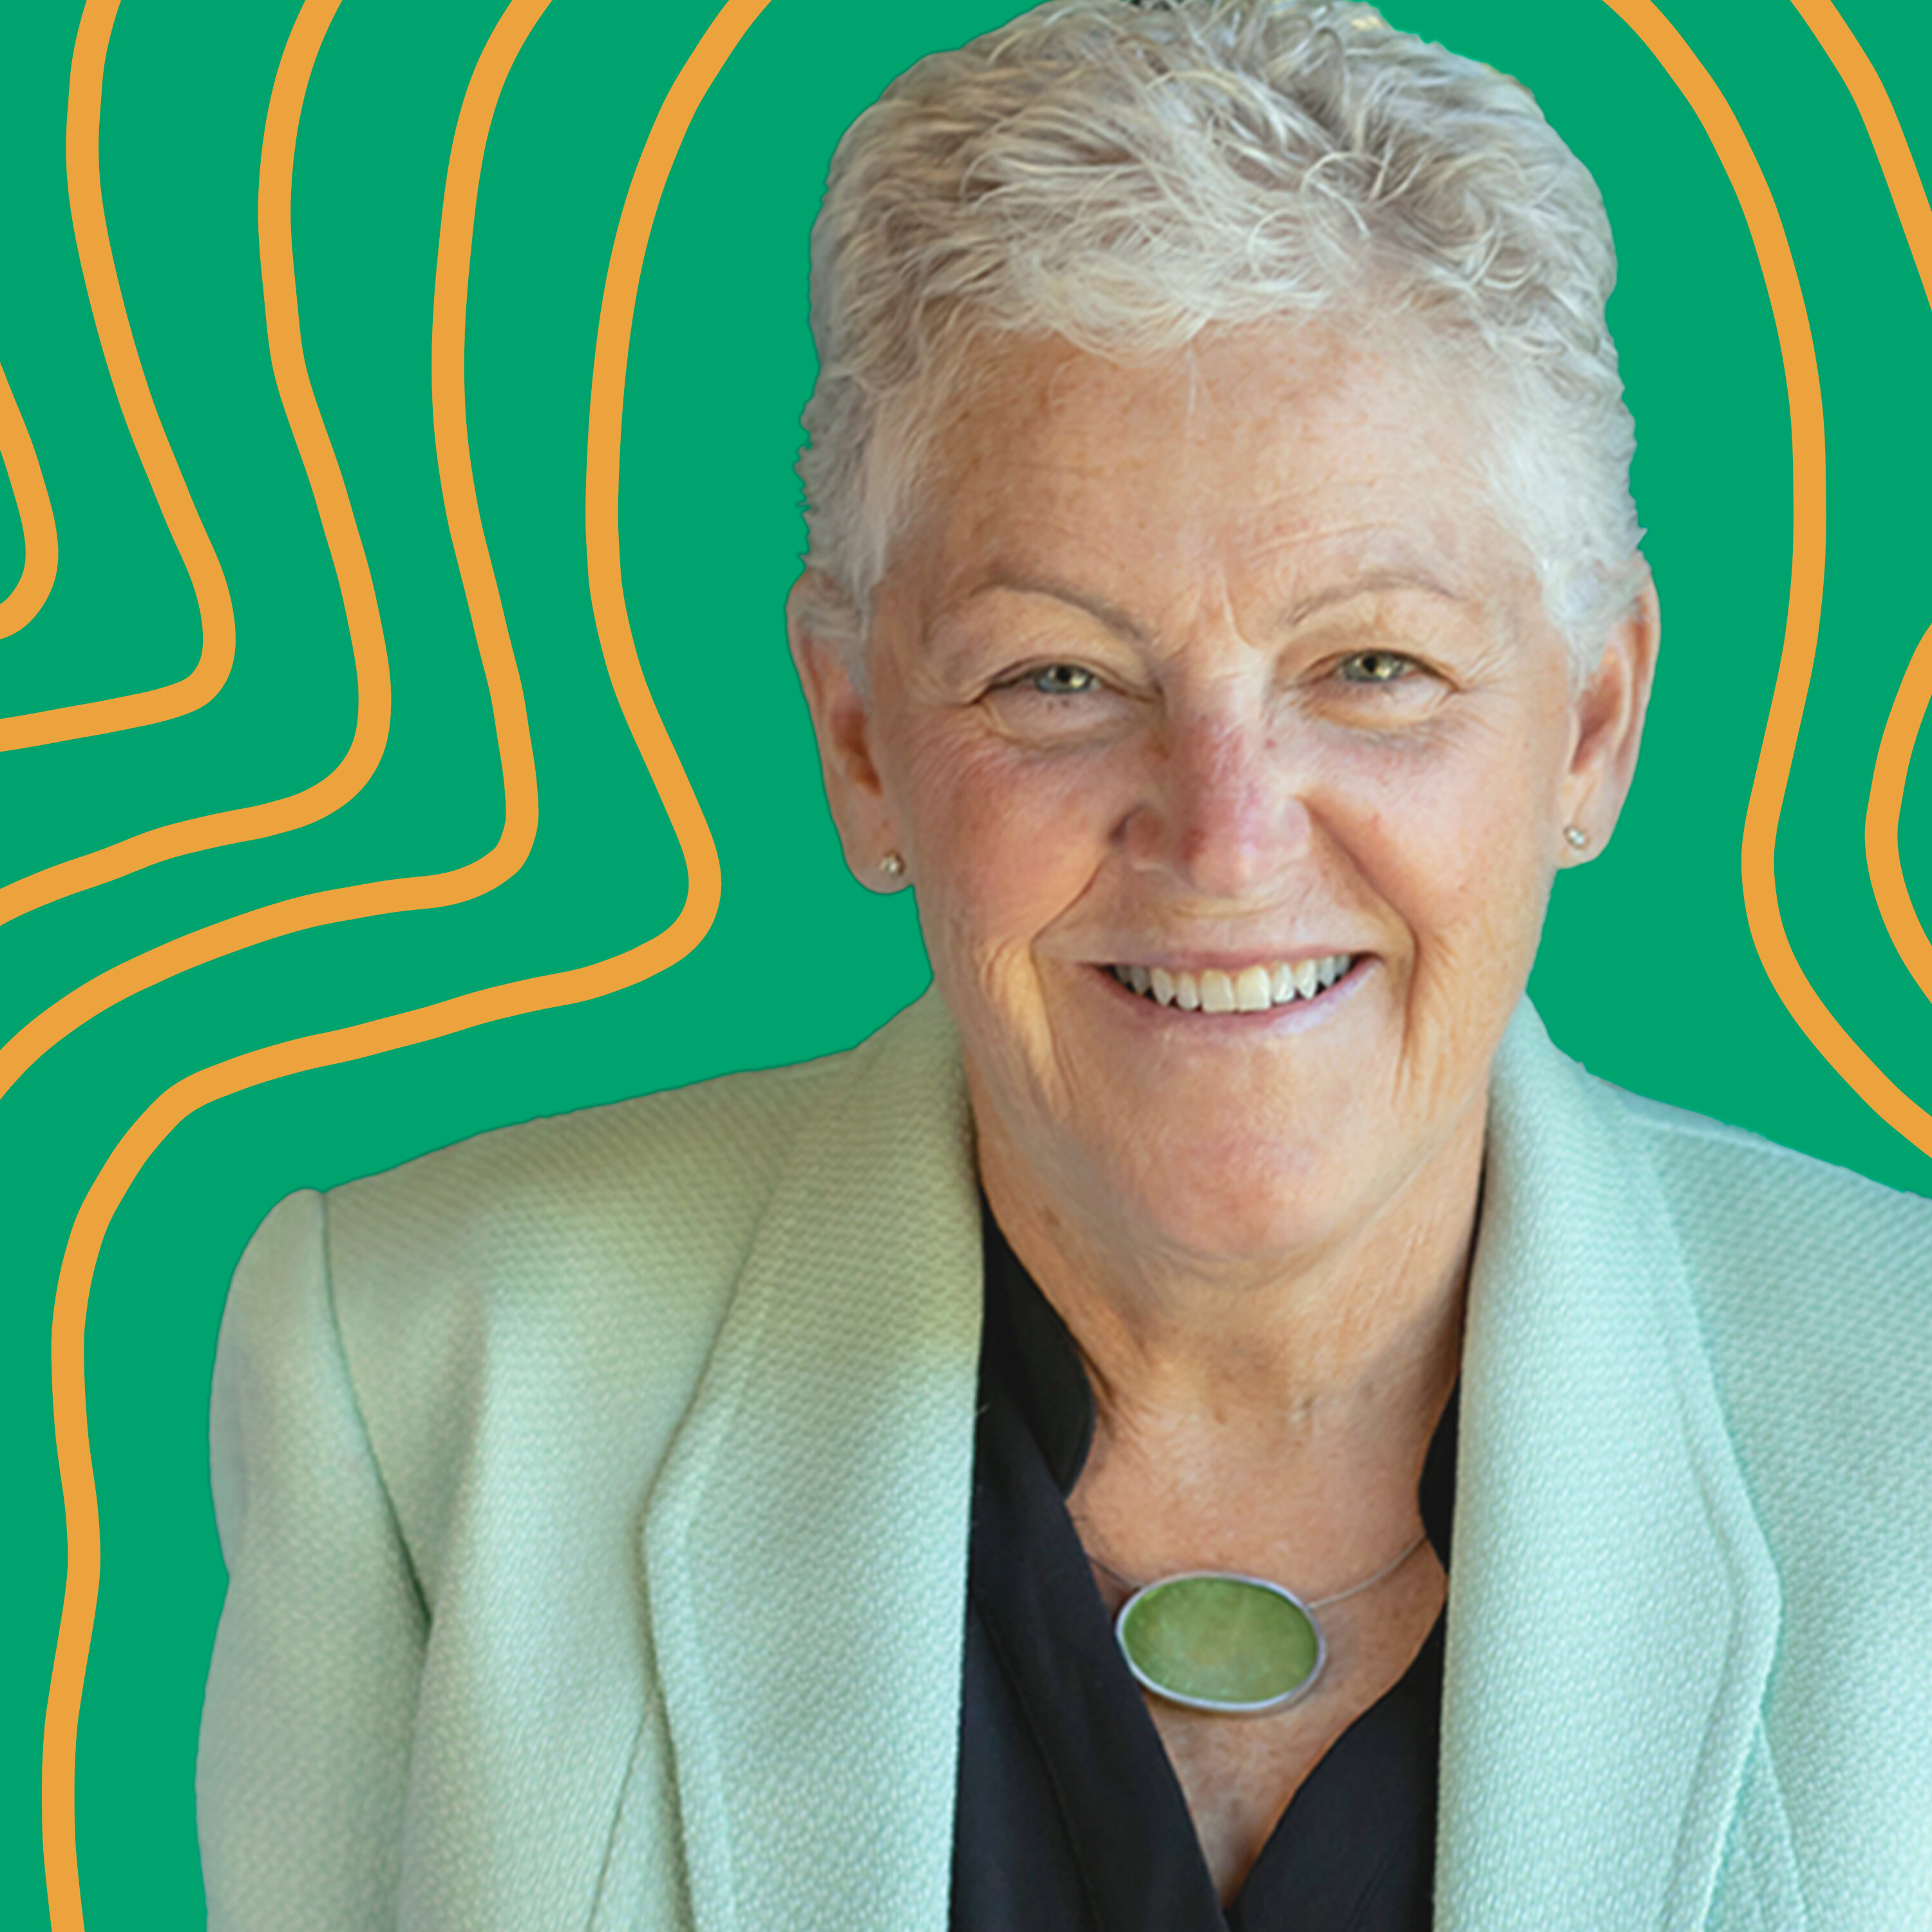 Julia Gets Wise with Gina McCarthy